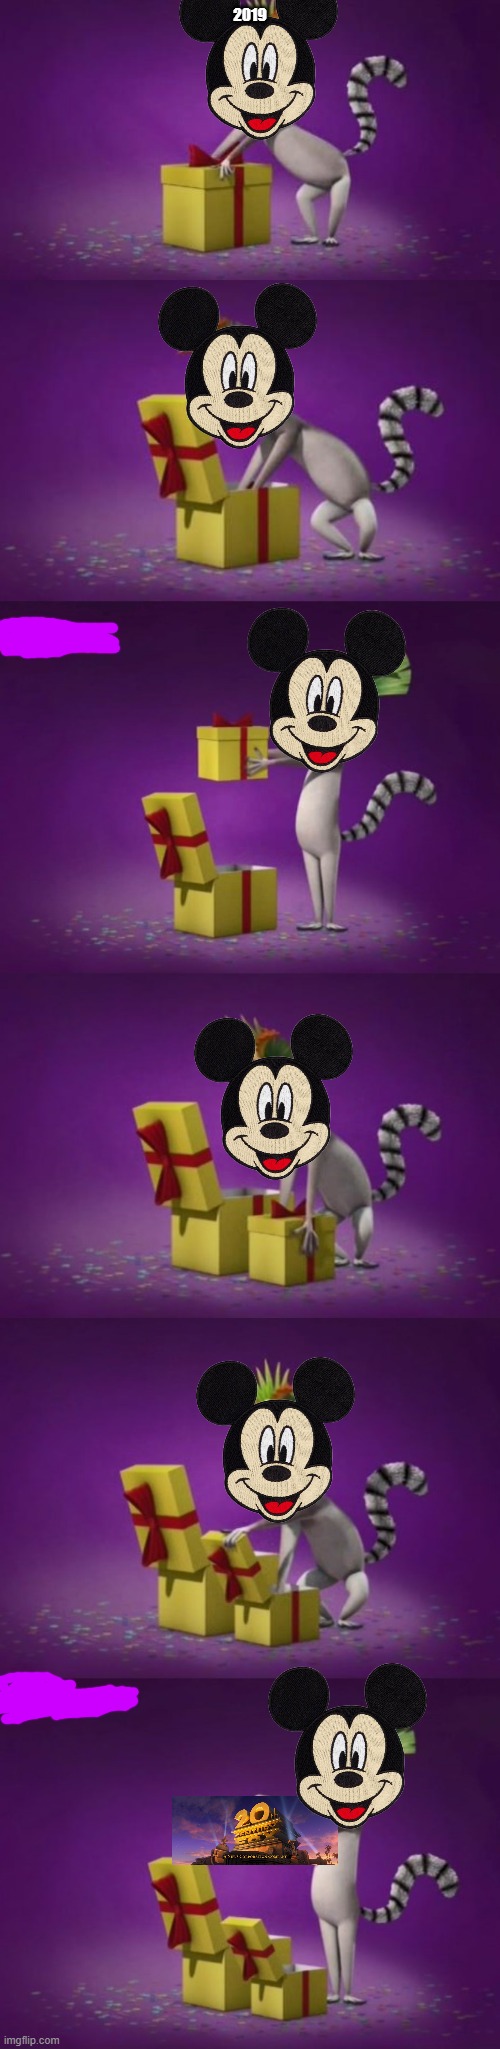 the day disney bought fox | 2019 | image tagged in king julian unboxing present in his mind,flashback,disney,new meme | made w/ Imgflip meme maker